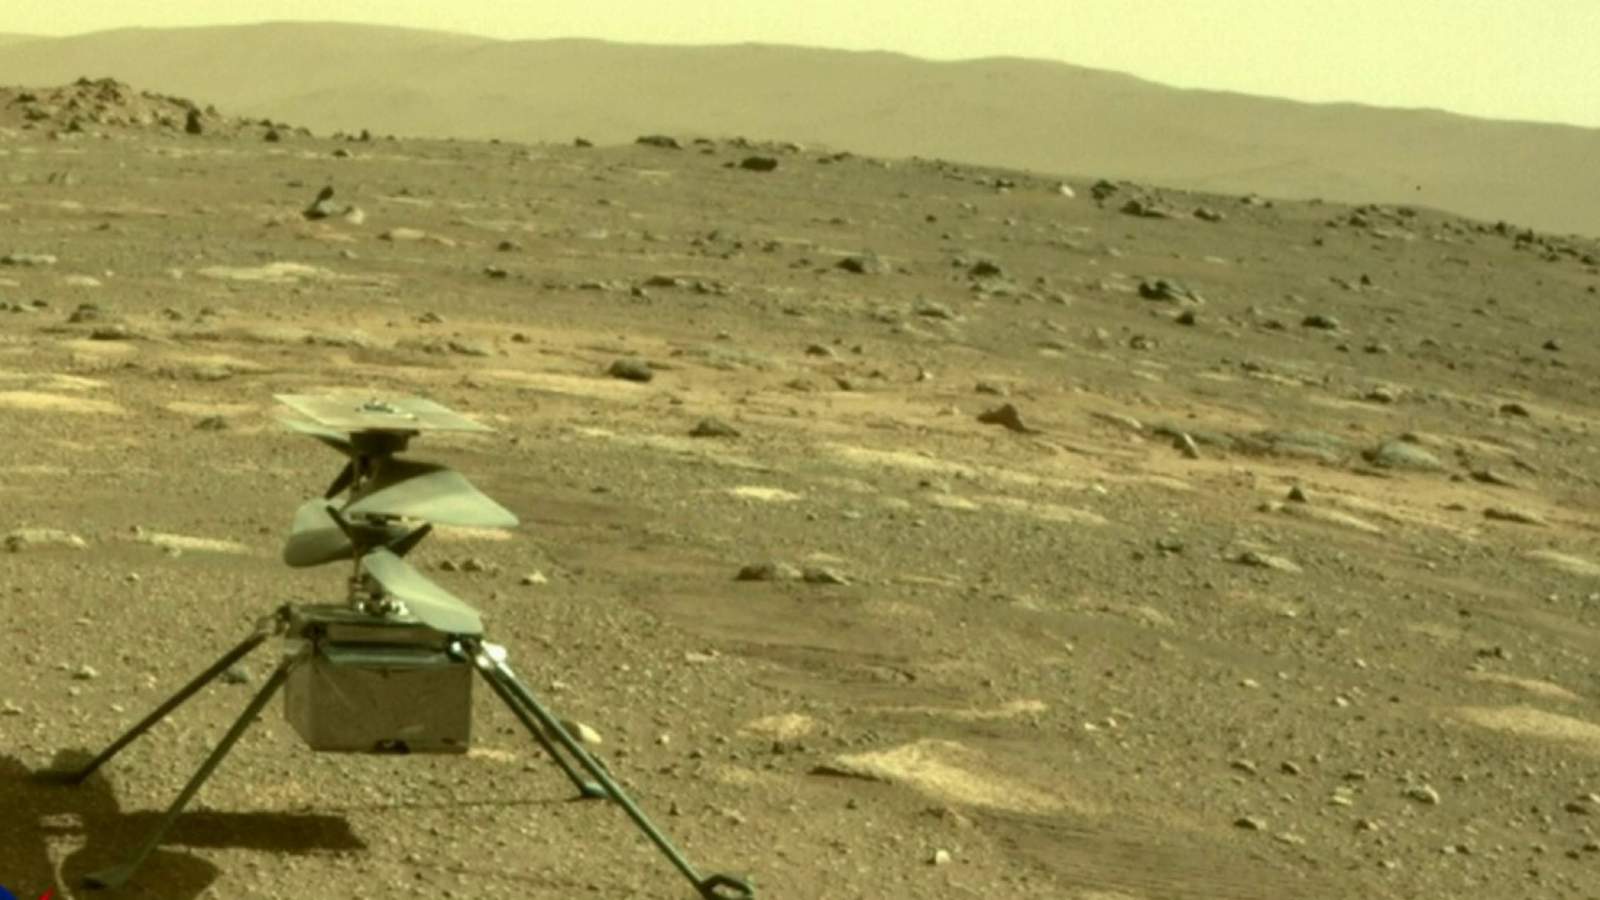 In essential step, small NASA chopper survives bitter Mars cold